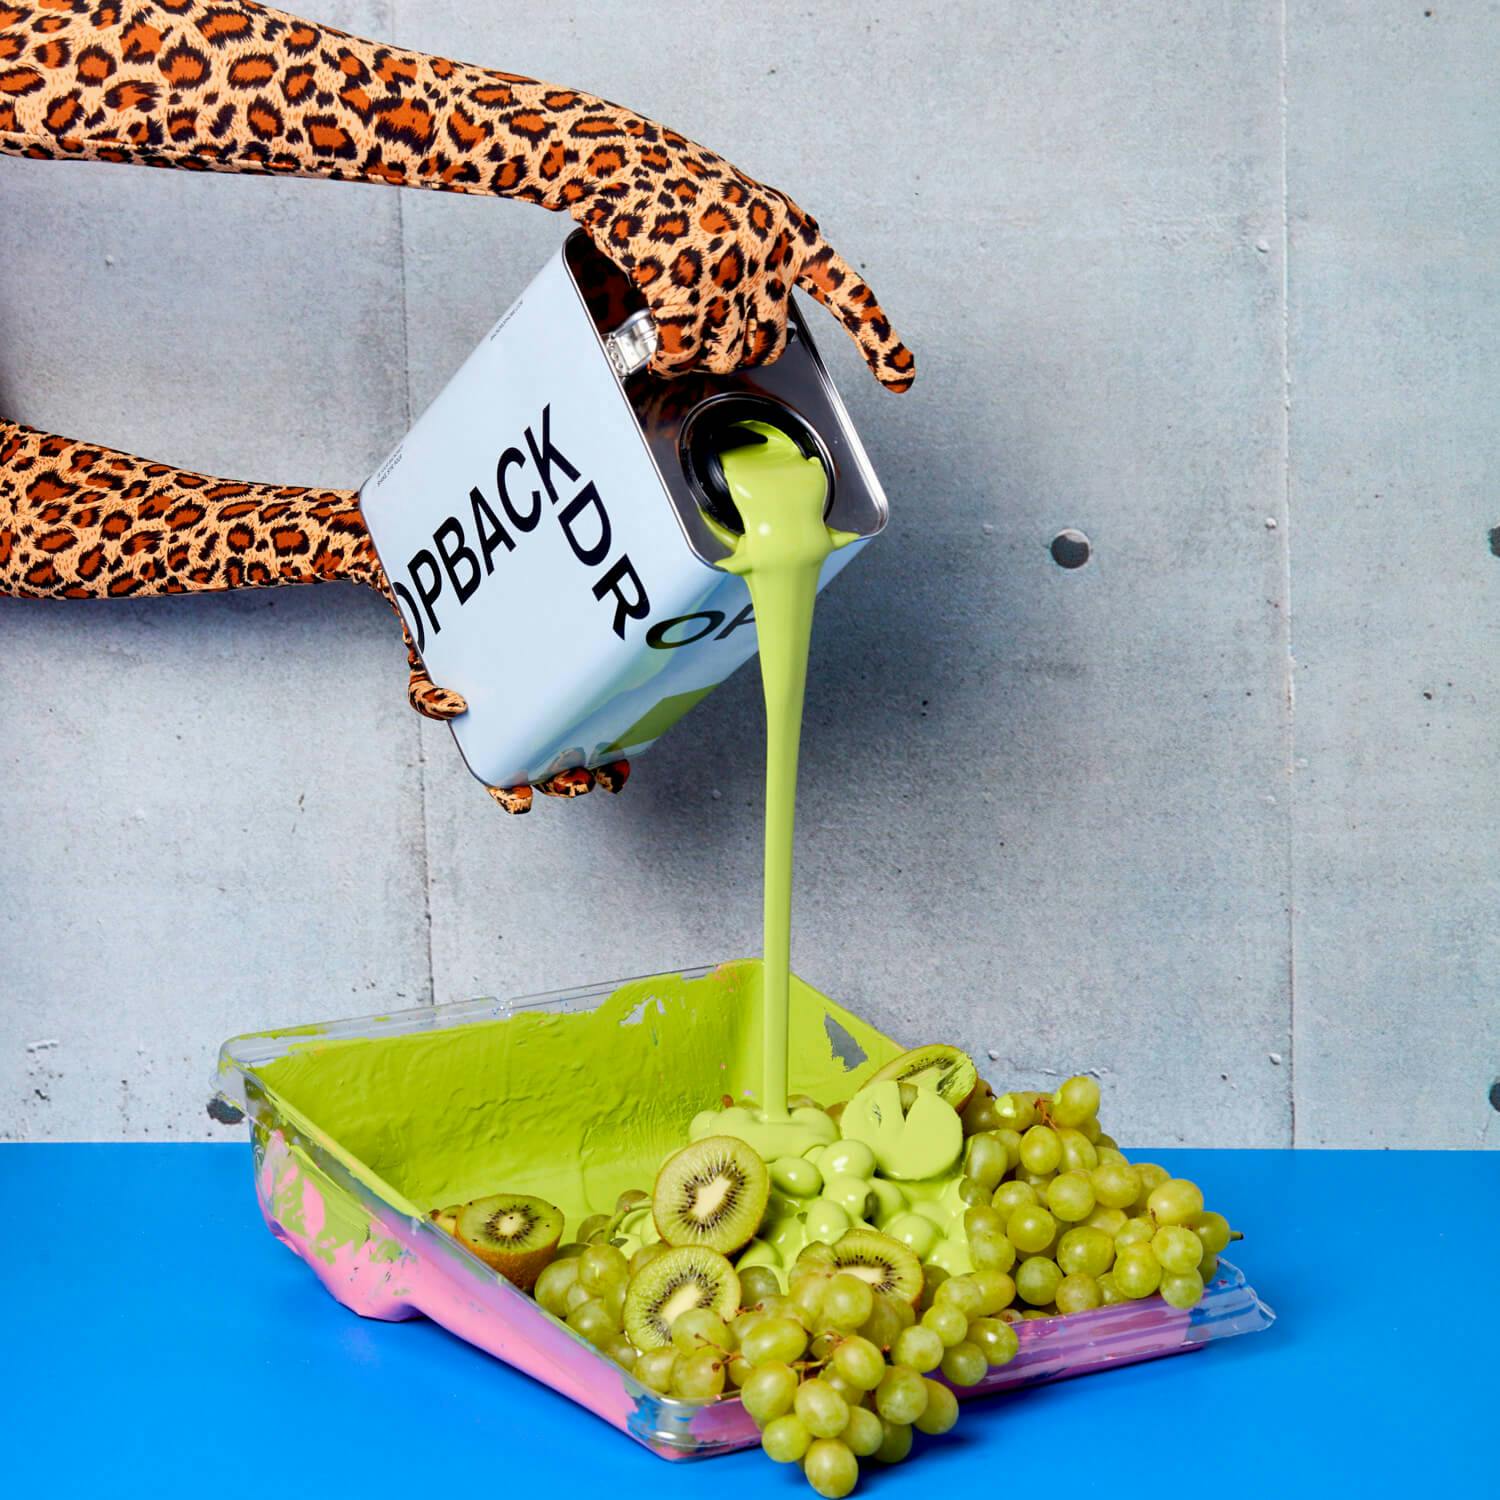 A can of PRETTY UGLY paint being poured onto green grapes and kiwi by hands wearing leopard-print gloves